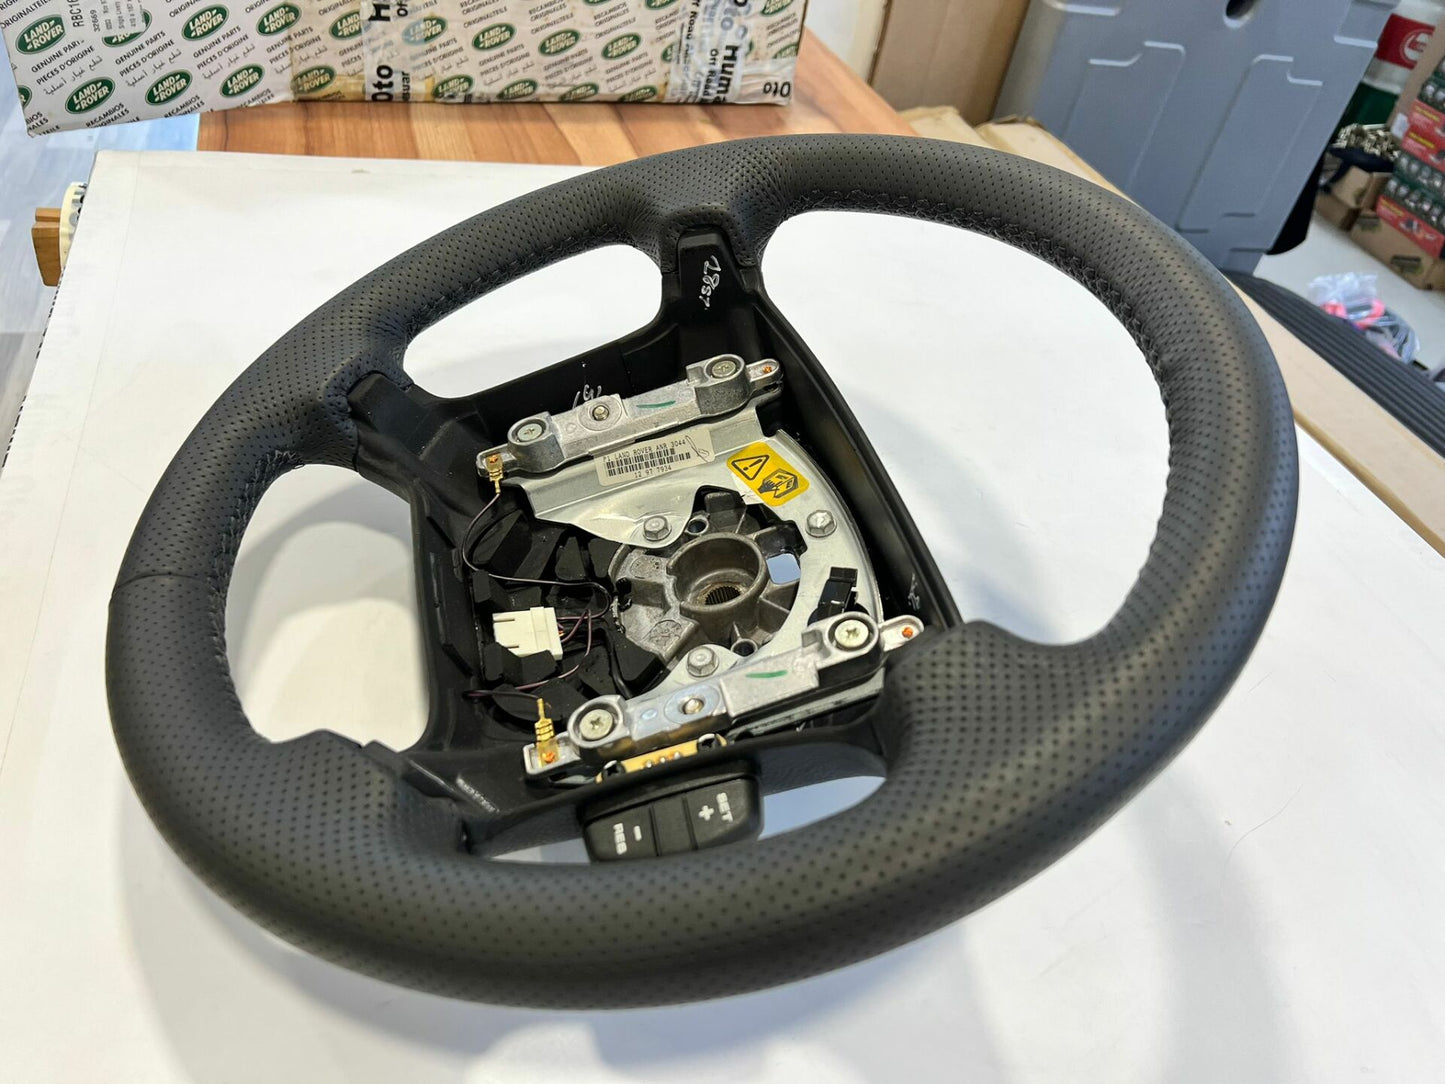 ANR3044LNF Steering Wheel Assembly Discovery 1